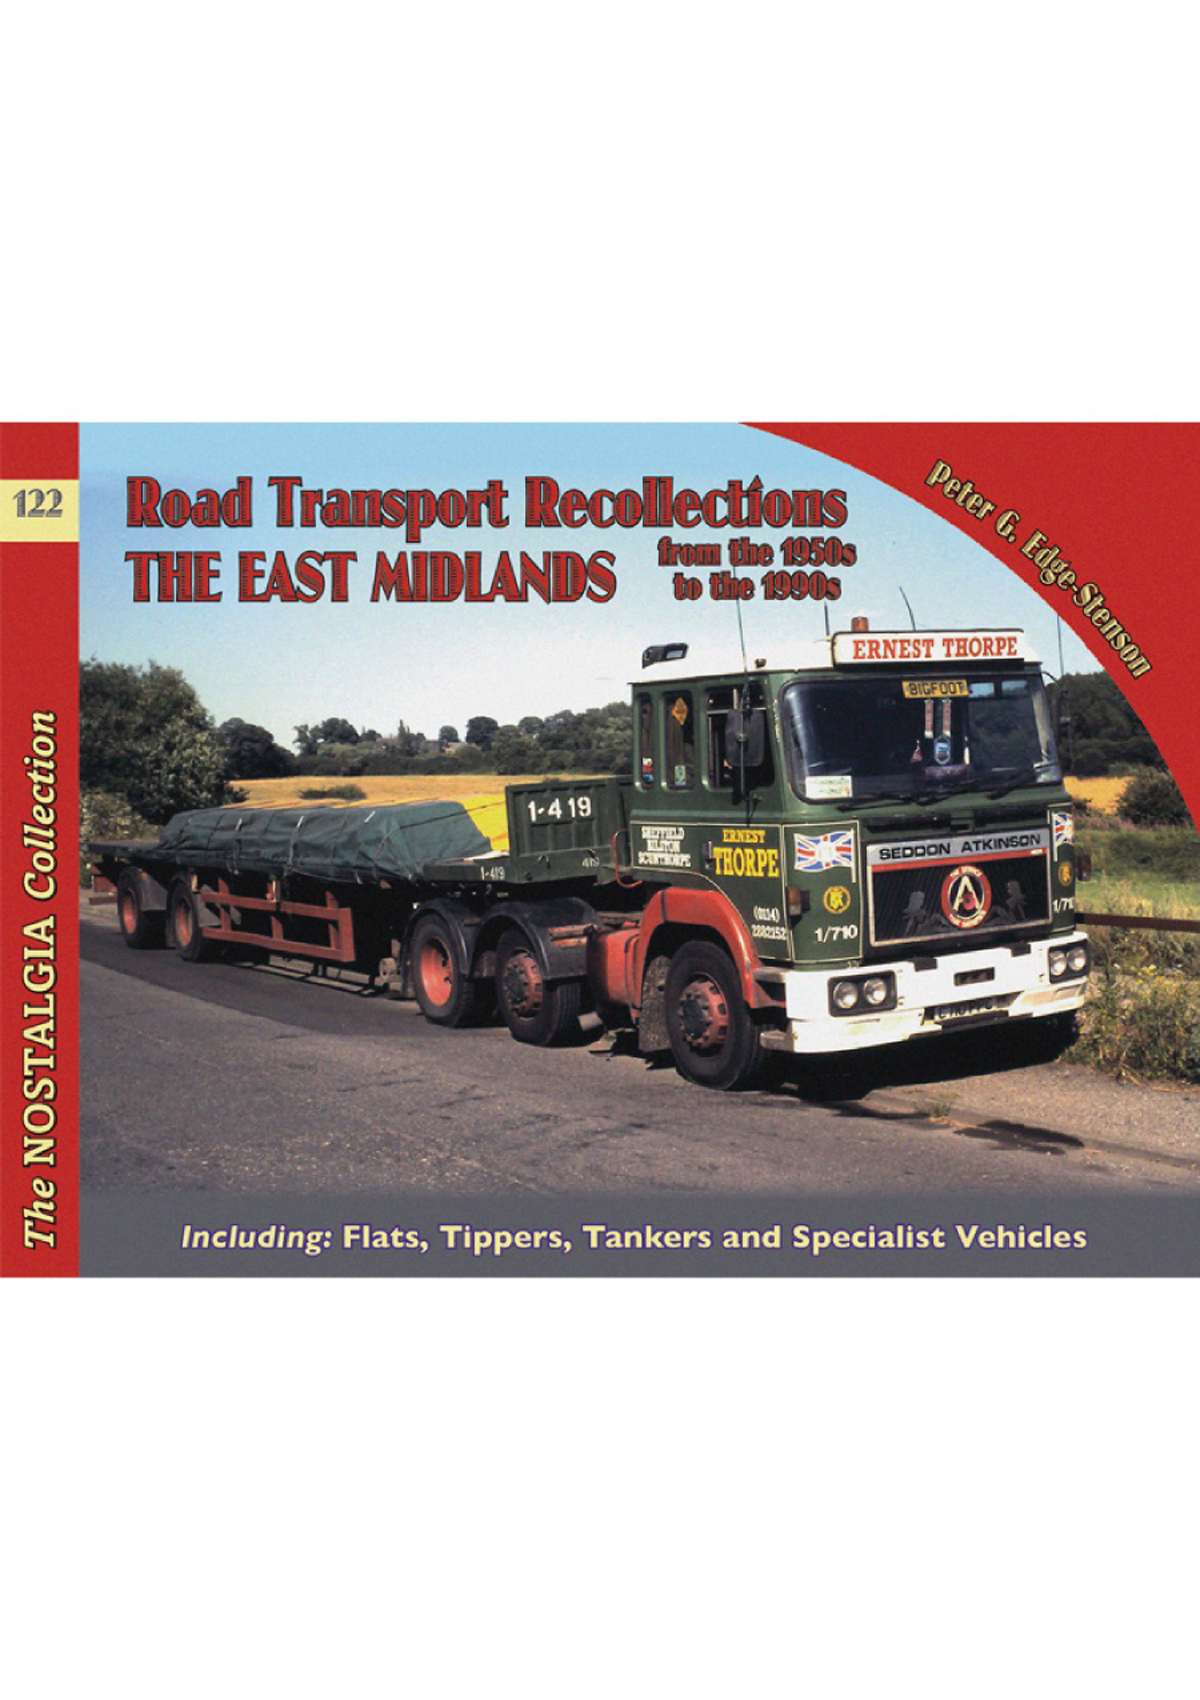 5836 - Road Transport Recollections: The East Midlands From The 1950s To The 1990s